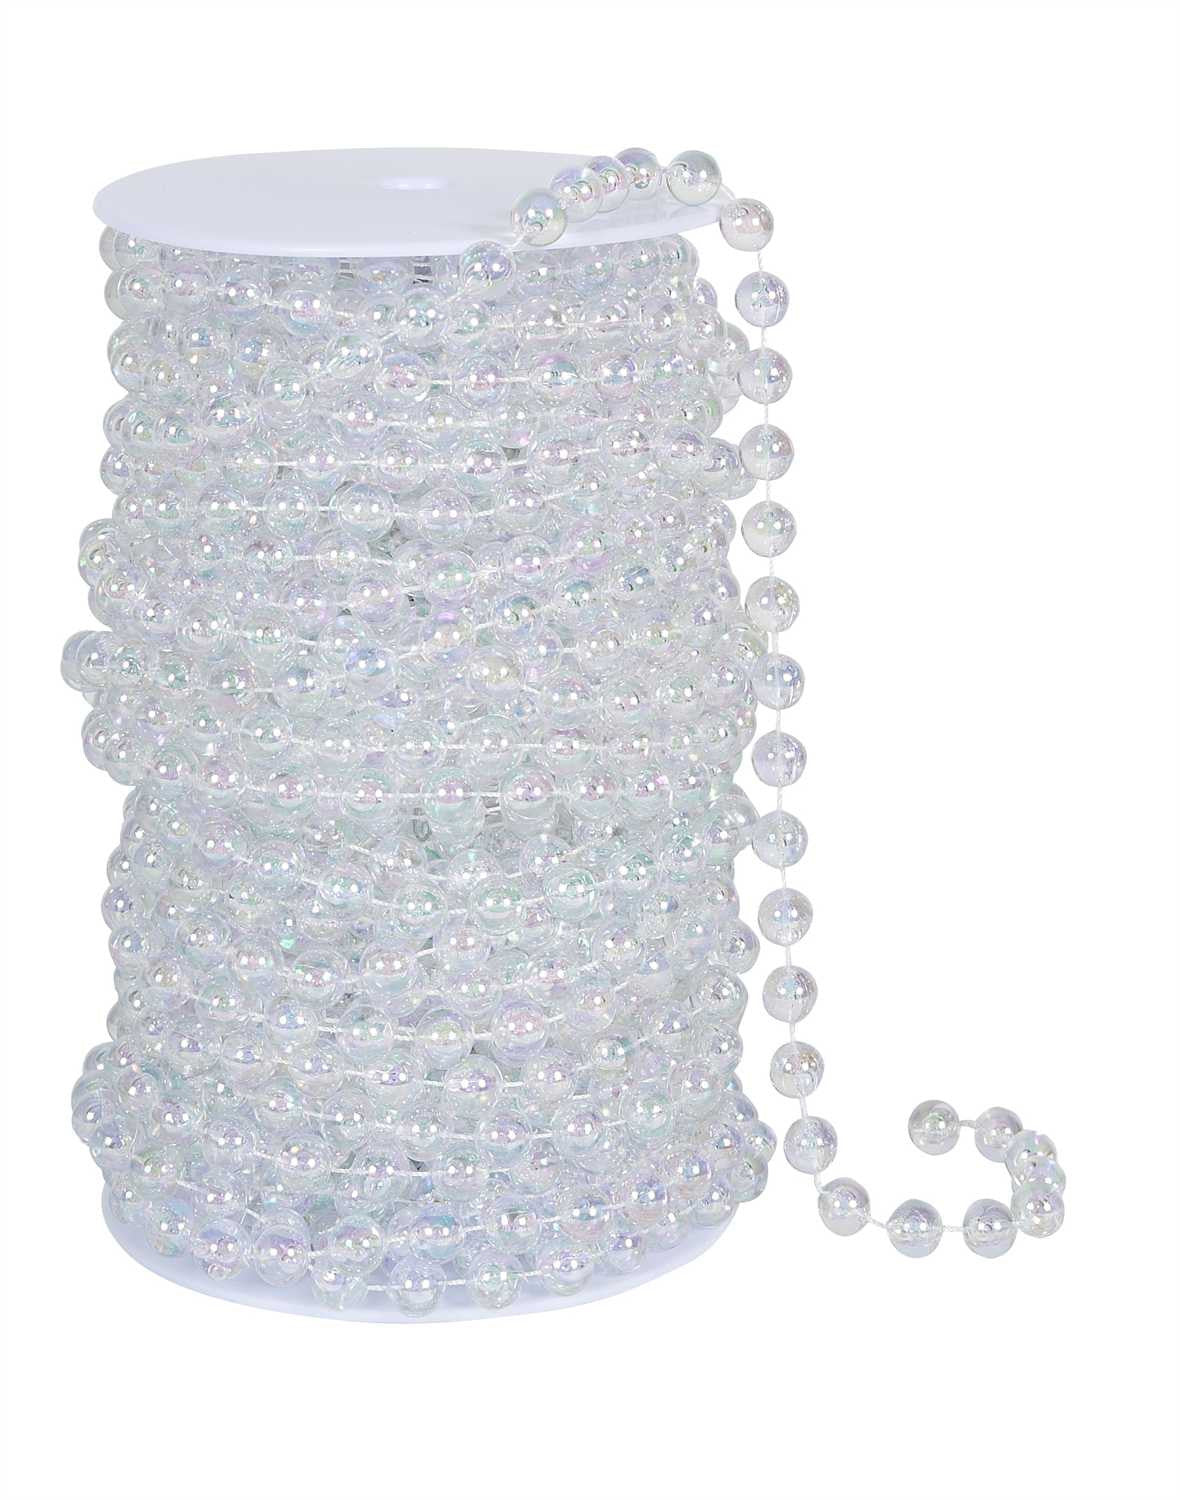 10mm Iridescent Clear Round Beads on a Spool, 66 Feet